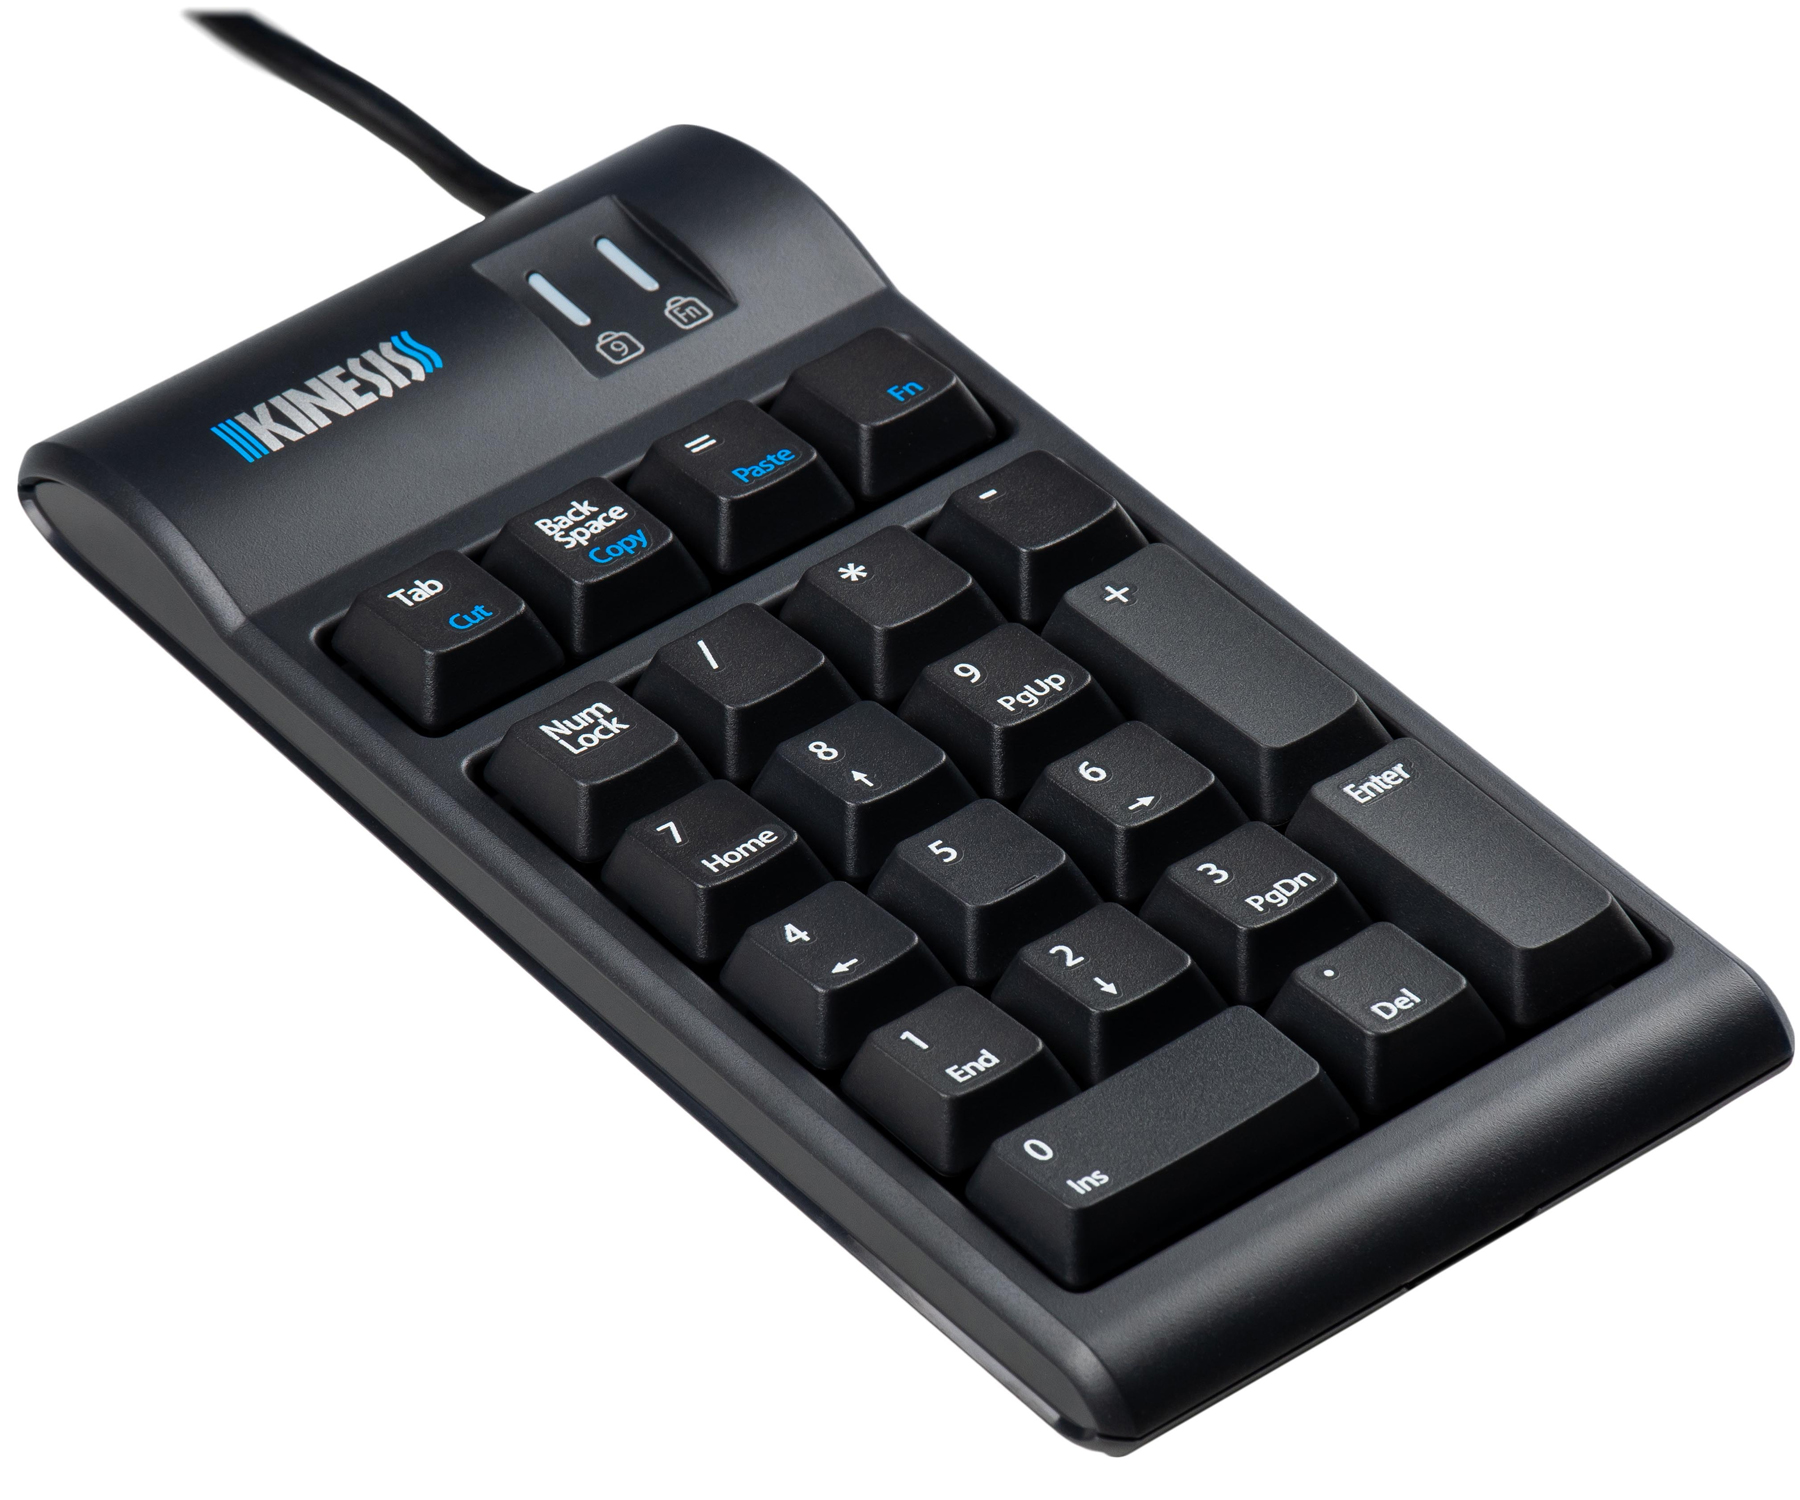 Freestyle2 Keypad for PC and Mac by Kinesis Corporation : ErgoCanada